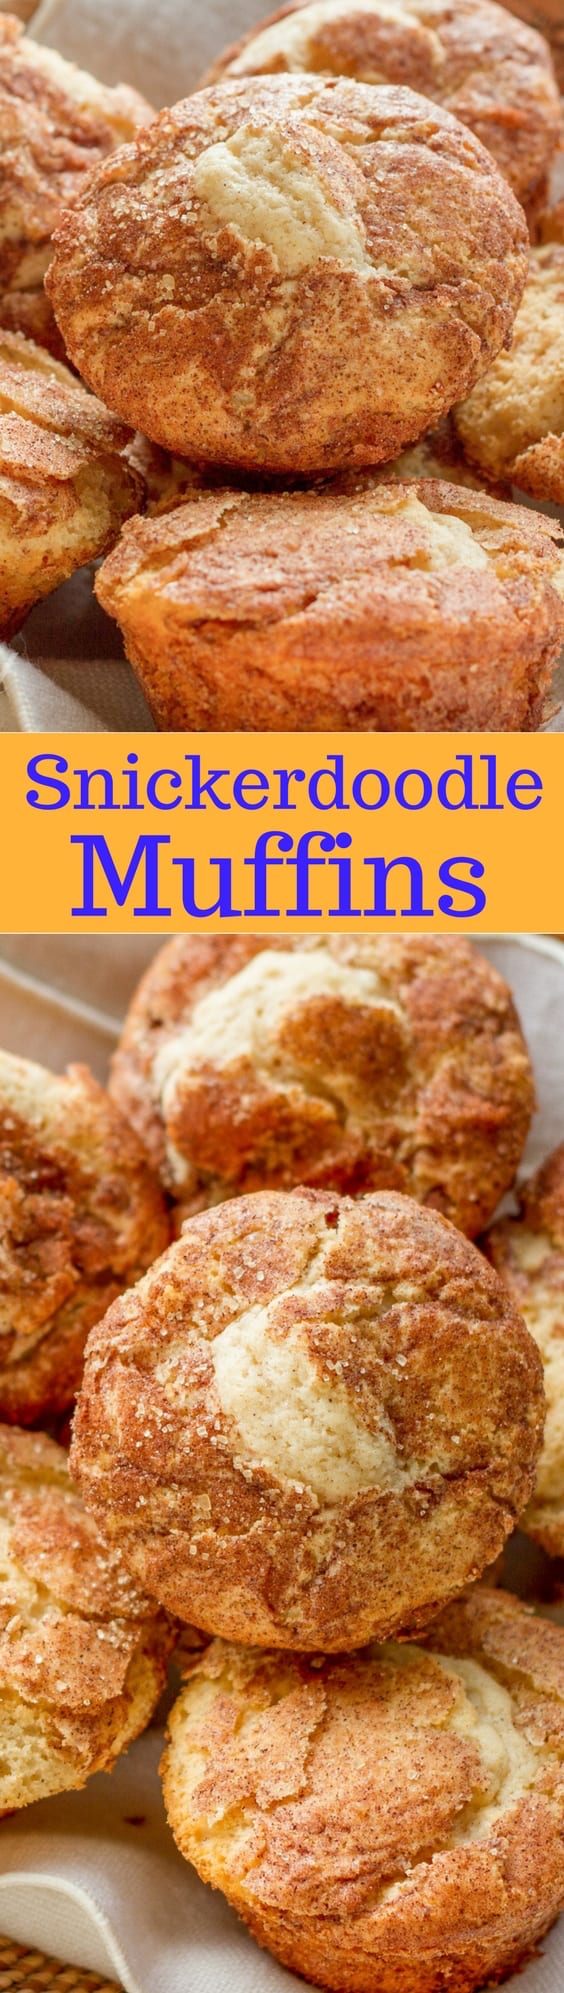 Snickerdoodle Muffins - Warm, soft, sweet muffins with a sugar and cinnamon crunchy top - these are impossible to resist! www.savingdessert.com